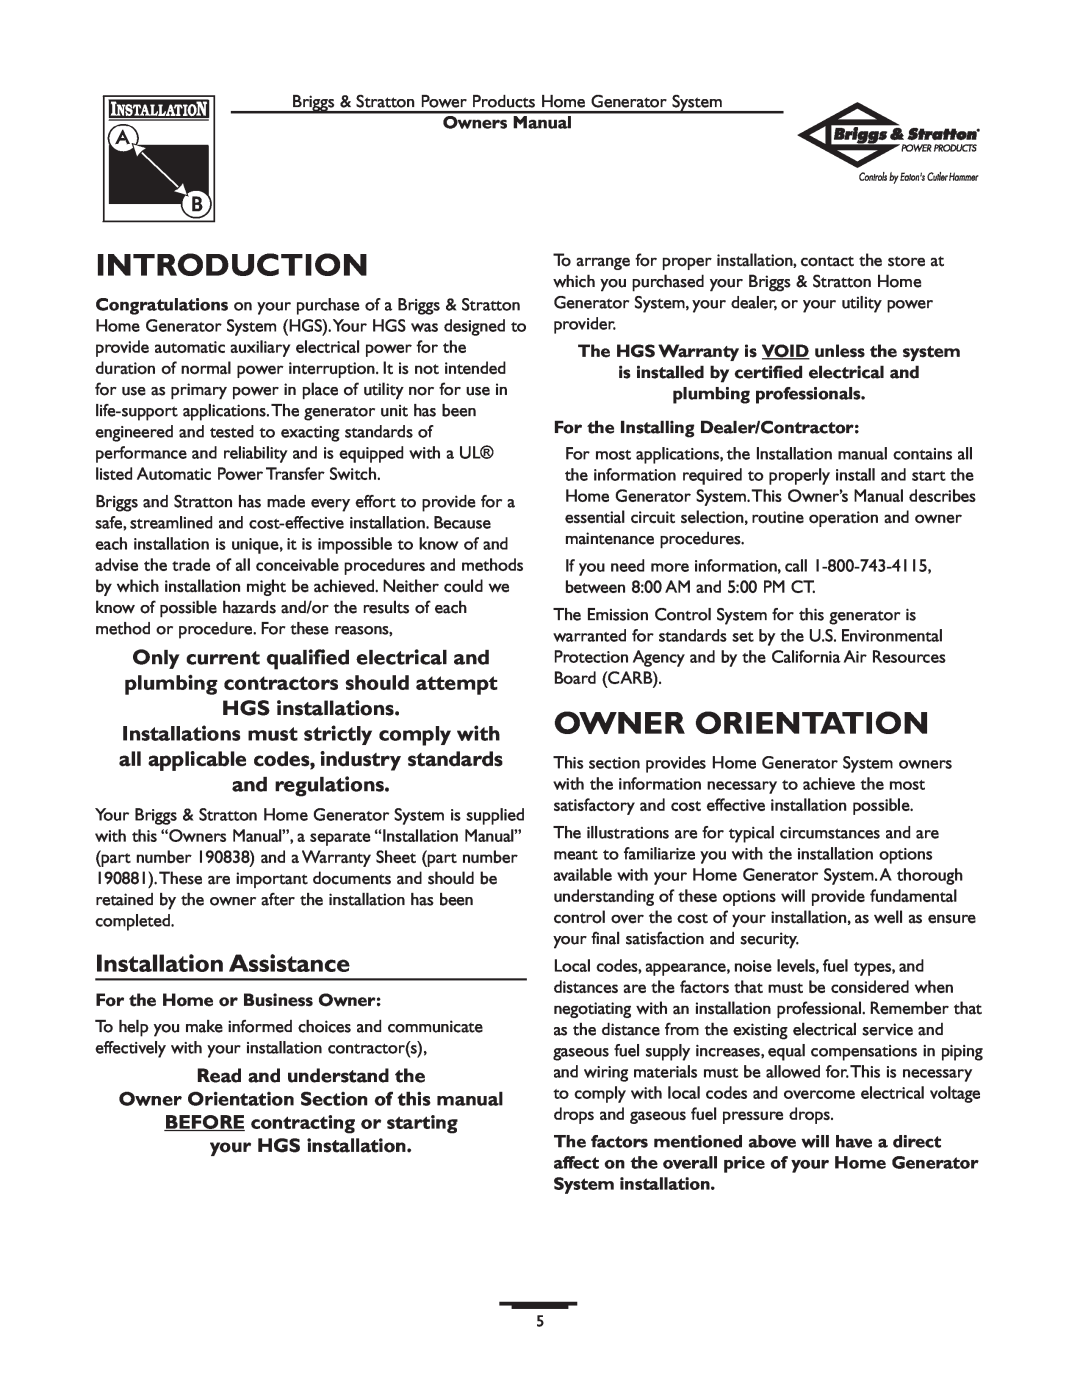 Briggs & Stratton 190839GS owner manual Introduction, Owner Orientation, Installation Assistance 